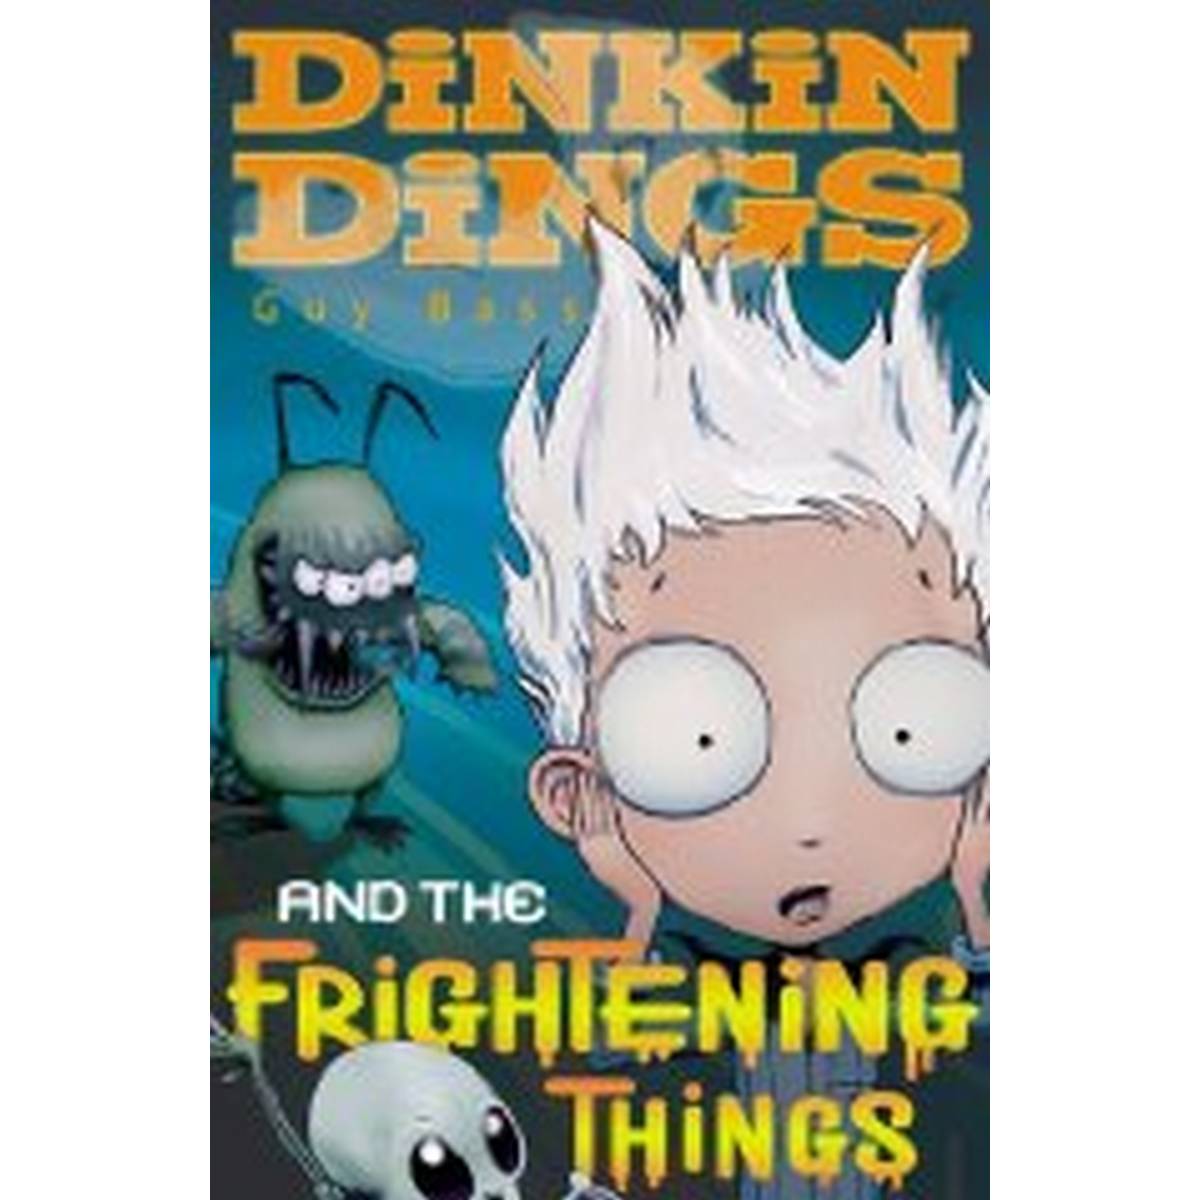 Dinkin Dings: and the Frightening Things